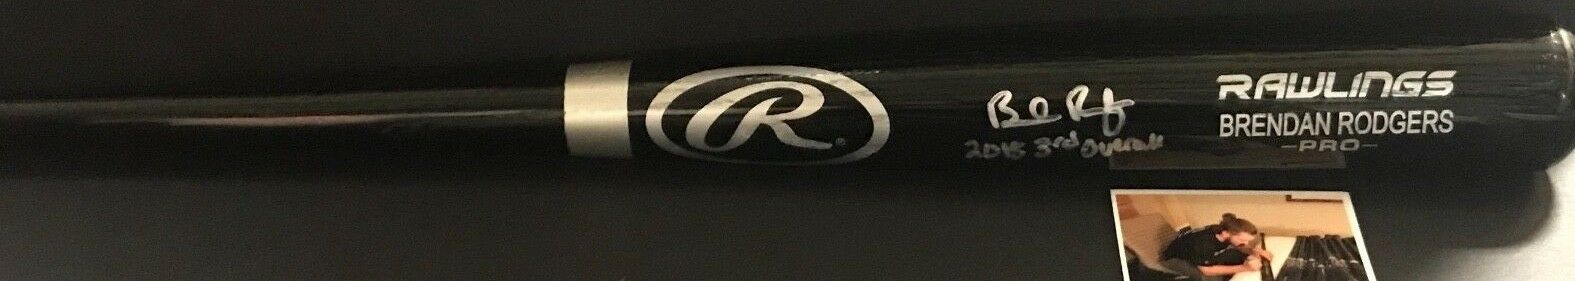 Brendan Rodgers Rockies Autographed Signed Black Full Size Bat 2015 3rd Overall